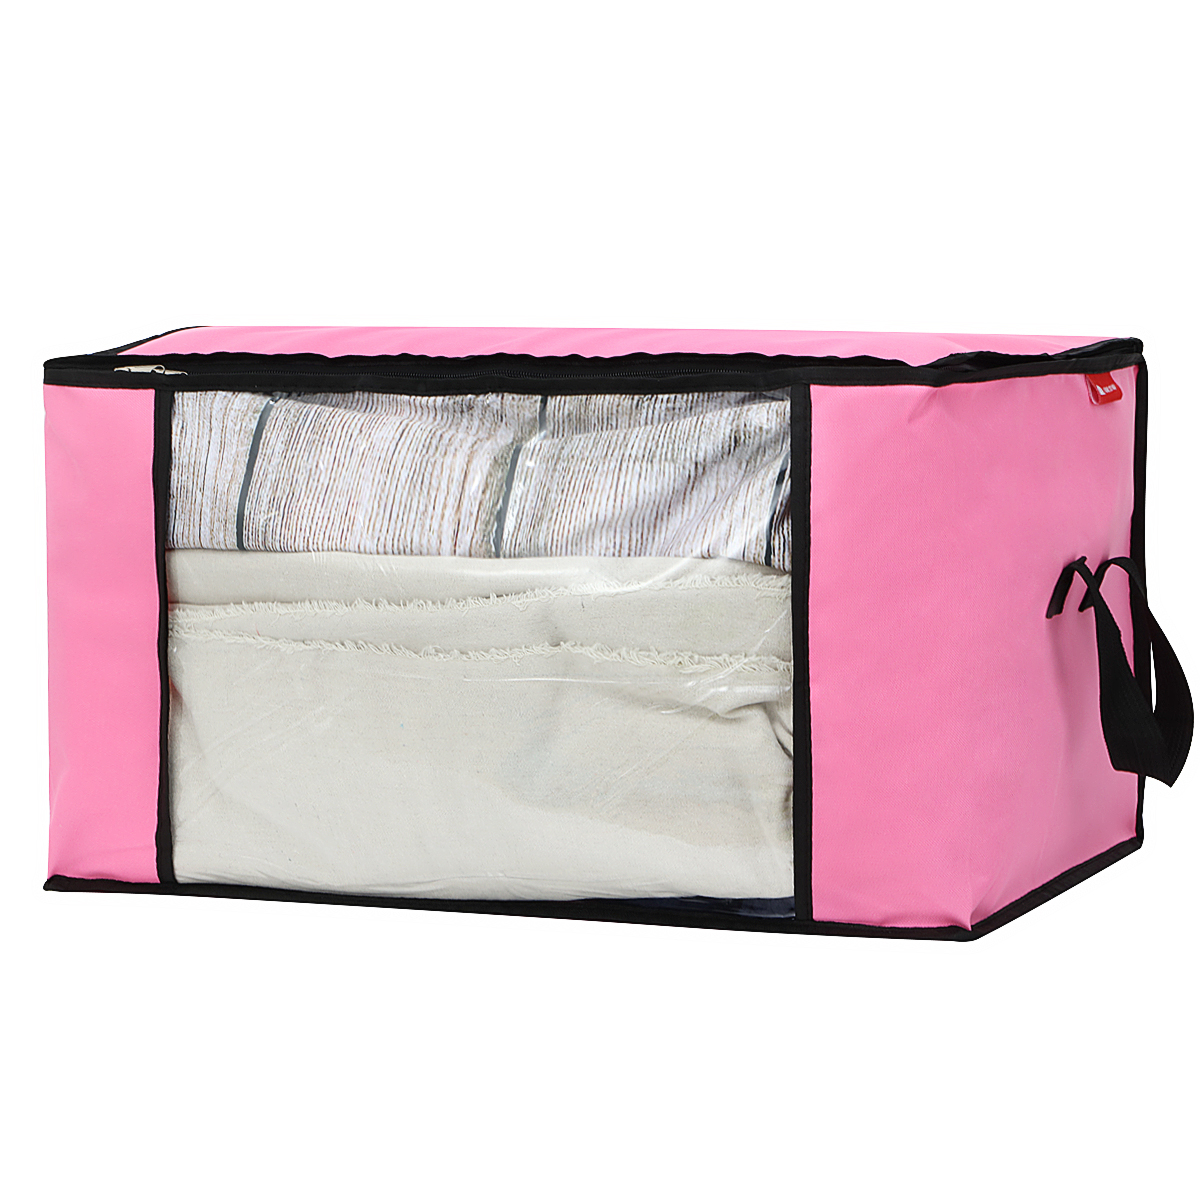 KING-DO-WAY-34-Pcs-90L-Clothing-Storage-Bags-Zipped-Clothes-Organizers-Quilts-Blankets-Bedding-Handb-1855896-7